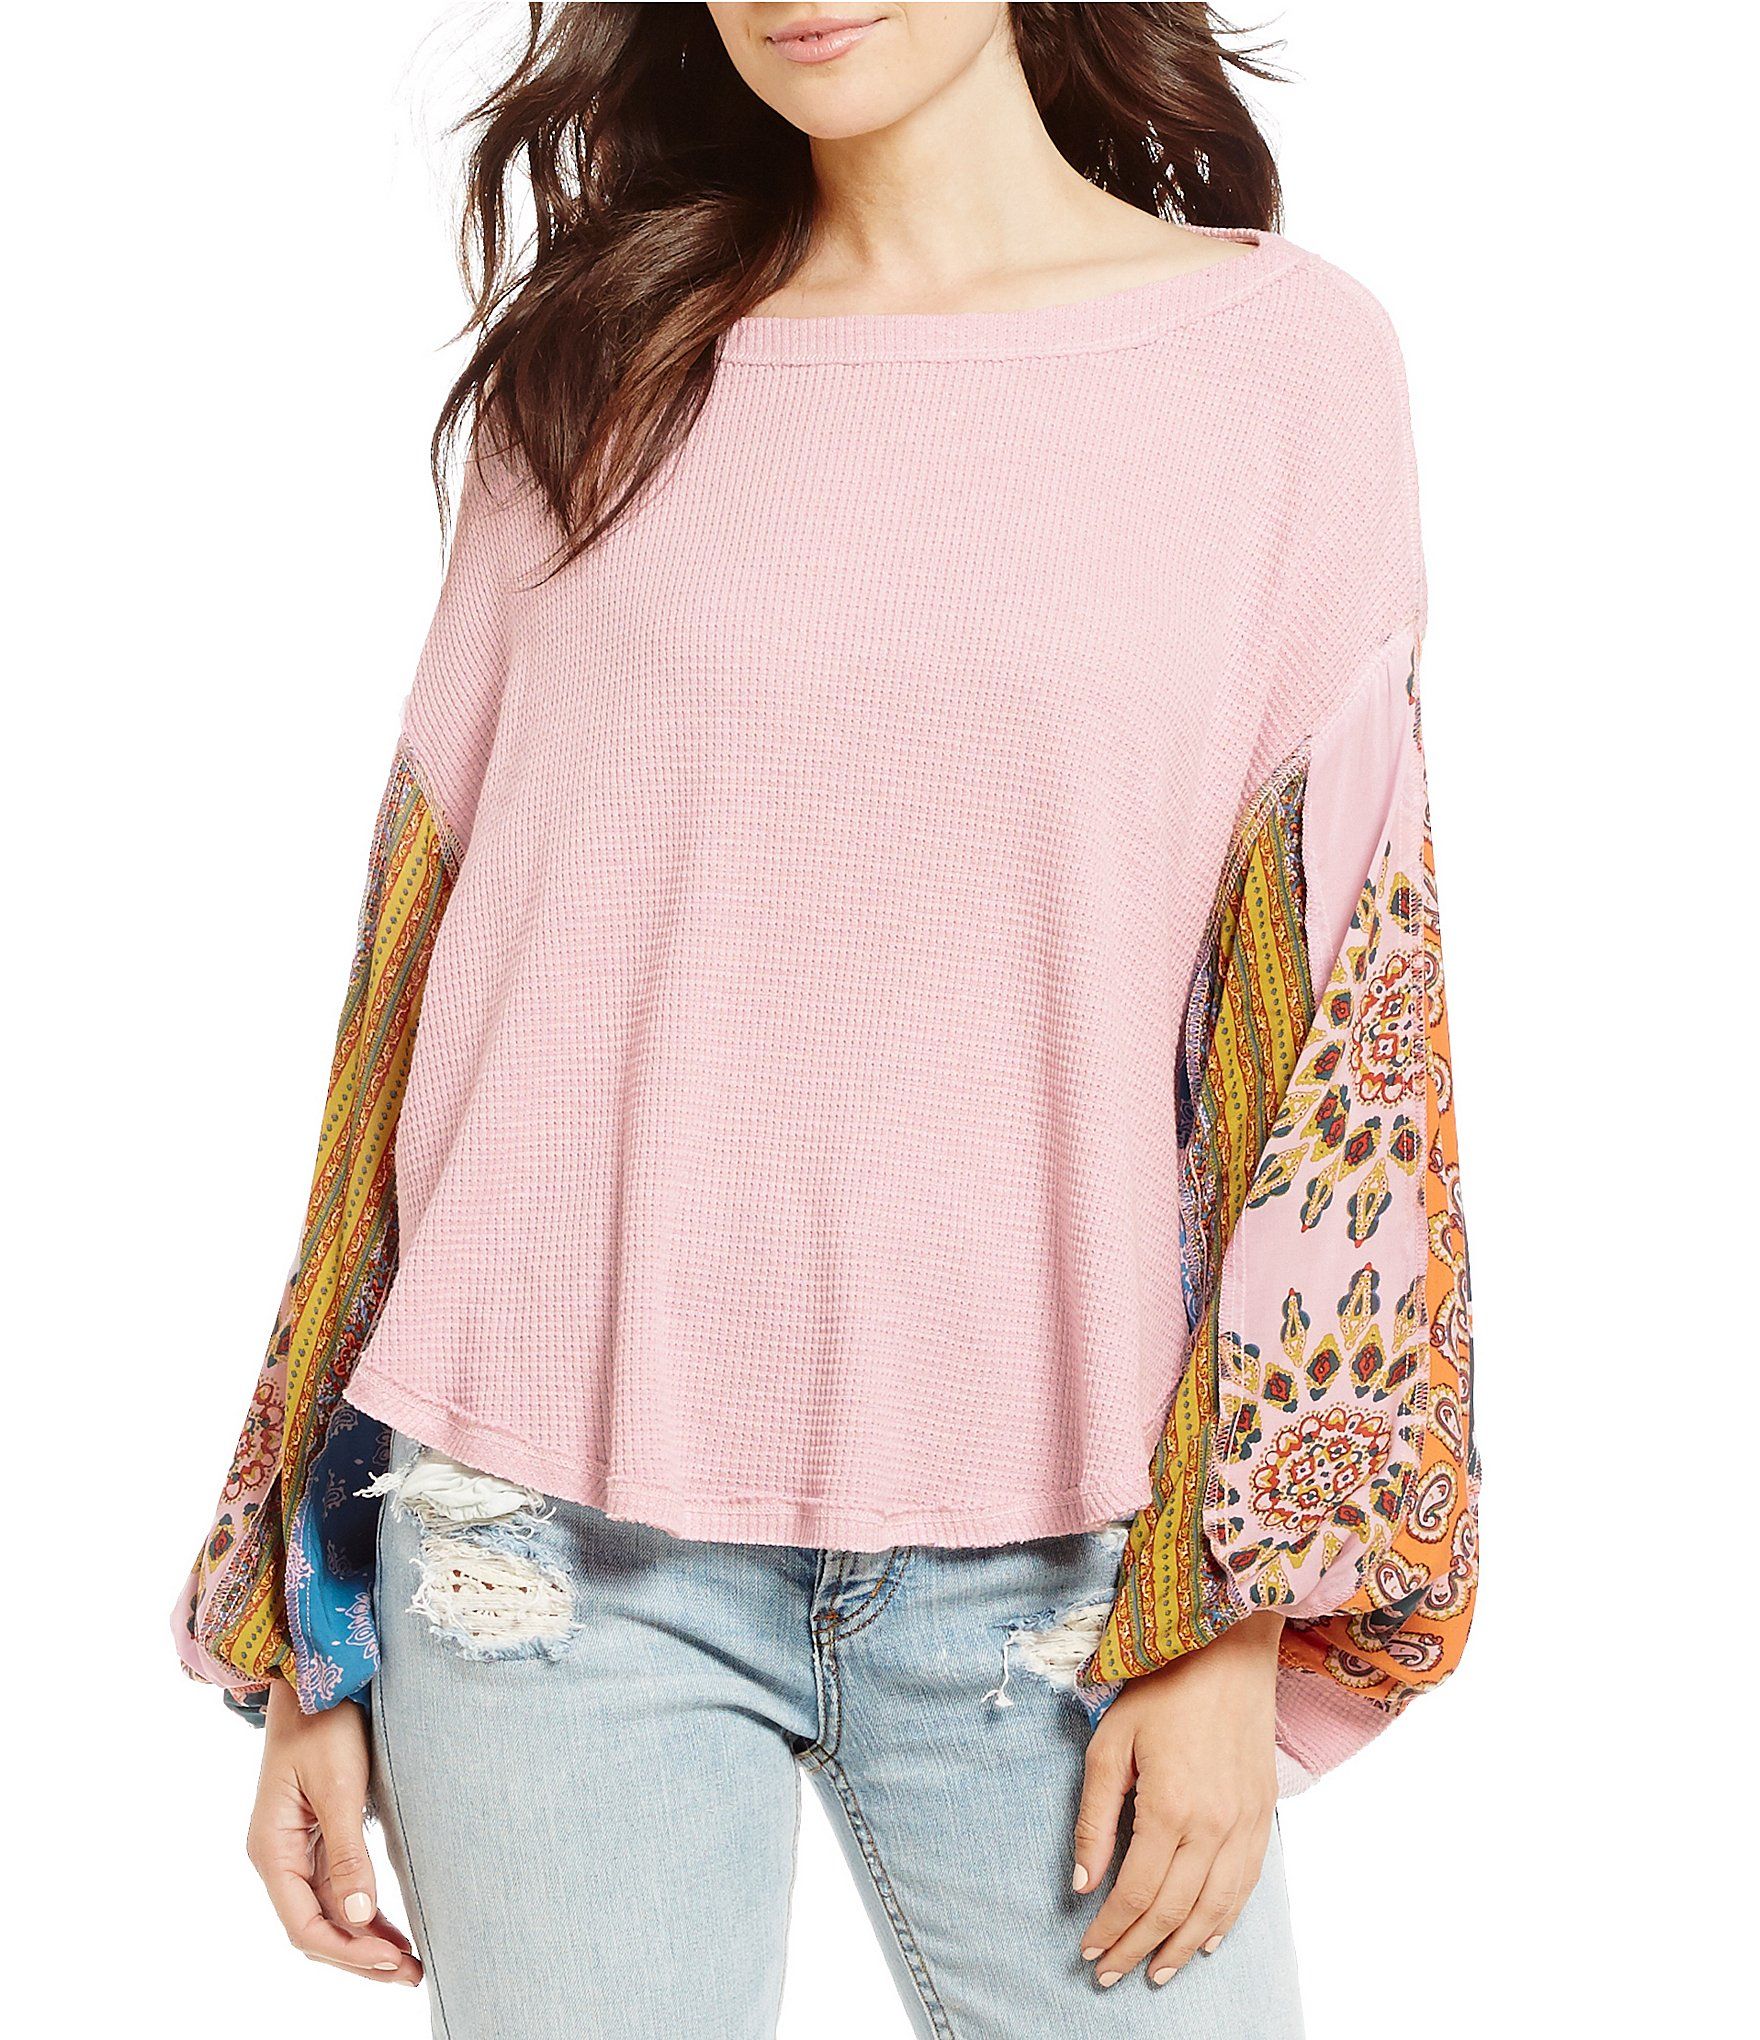 Free People Blossom Thermal Printed Balloon Sleeve Blouse | Dillards Inc.